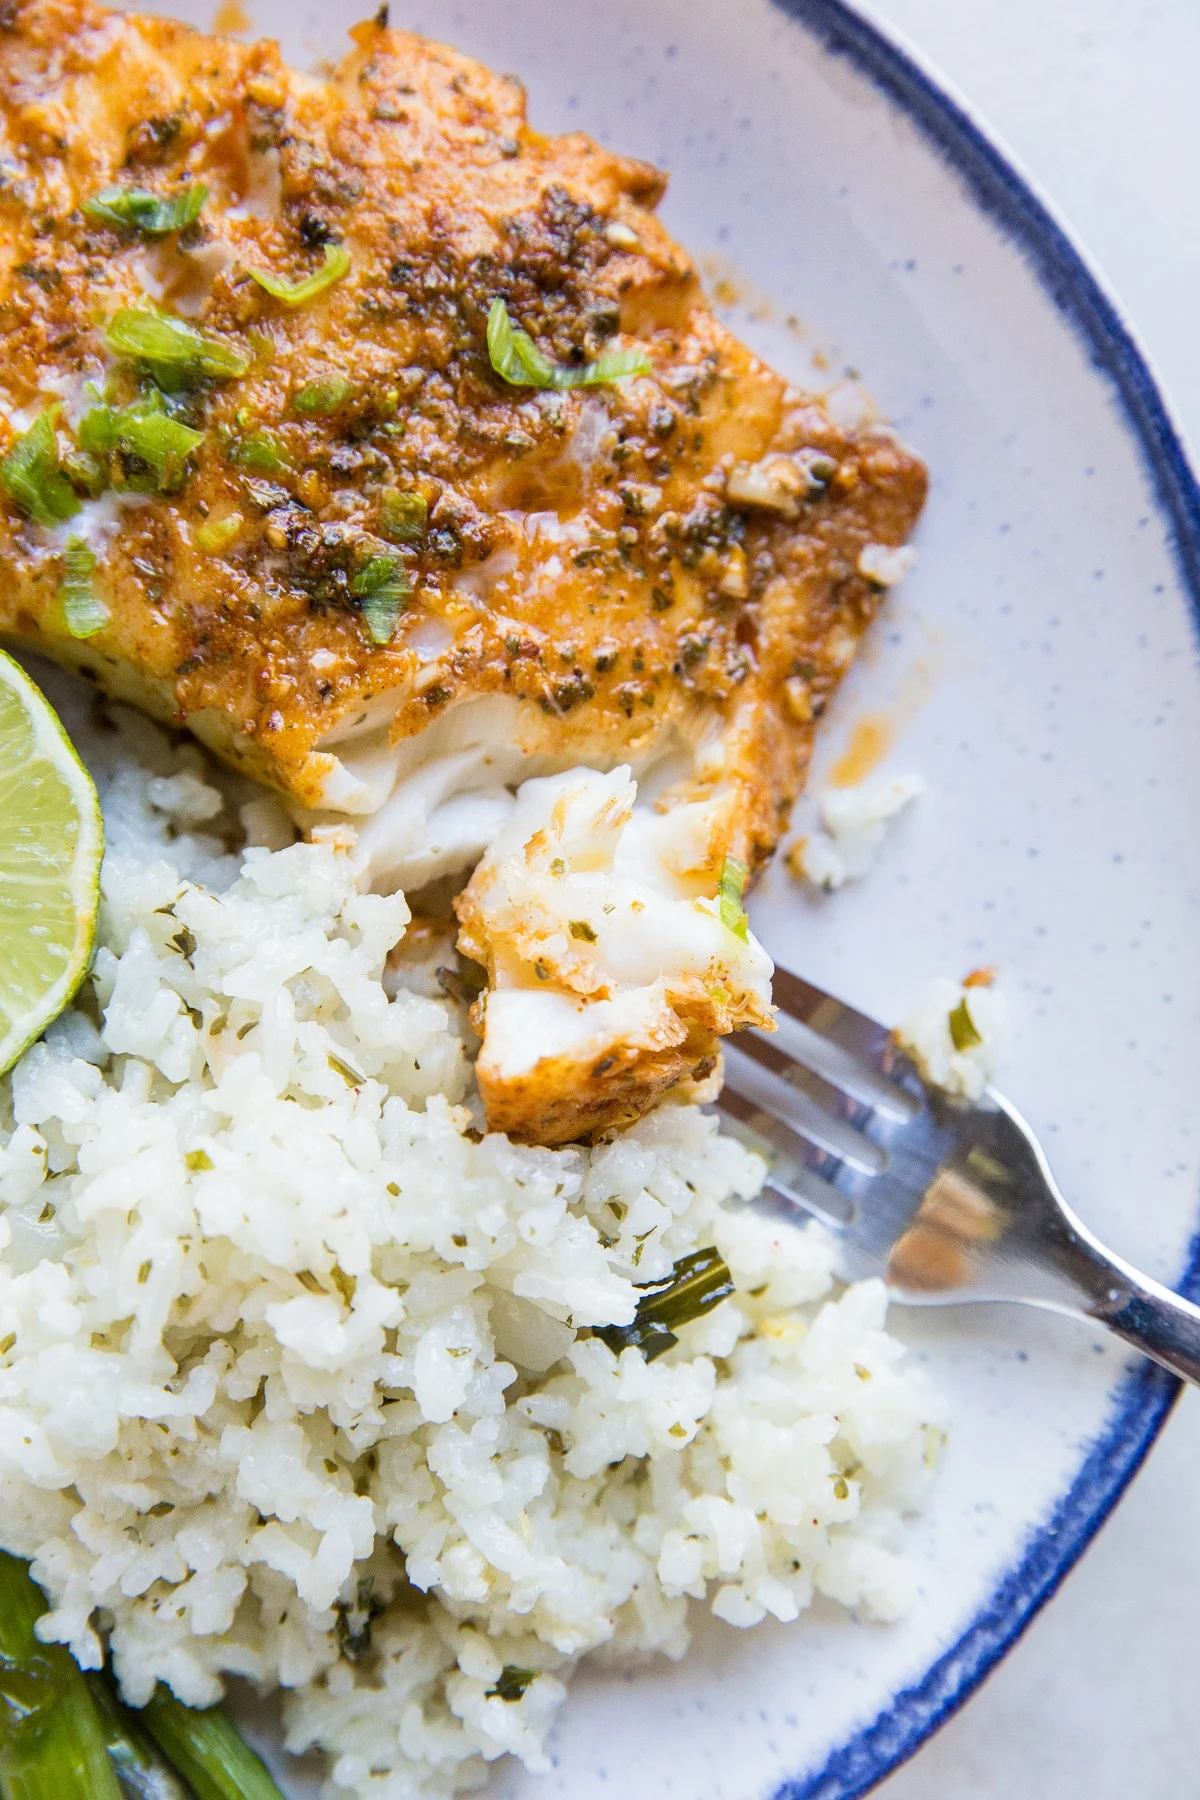 Chili Lime Baked Cod Recipe - clean, easy, keto, paleo, whole30! This recipe comes together quickly!